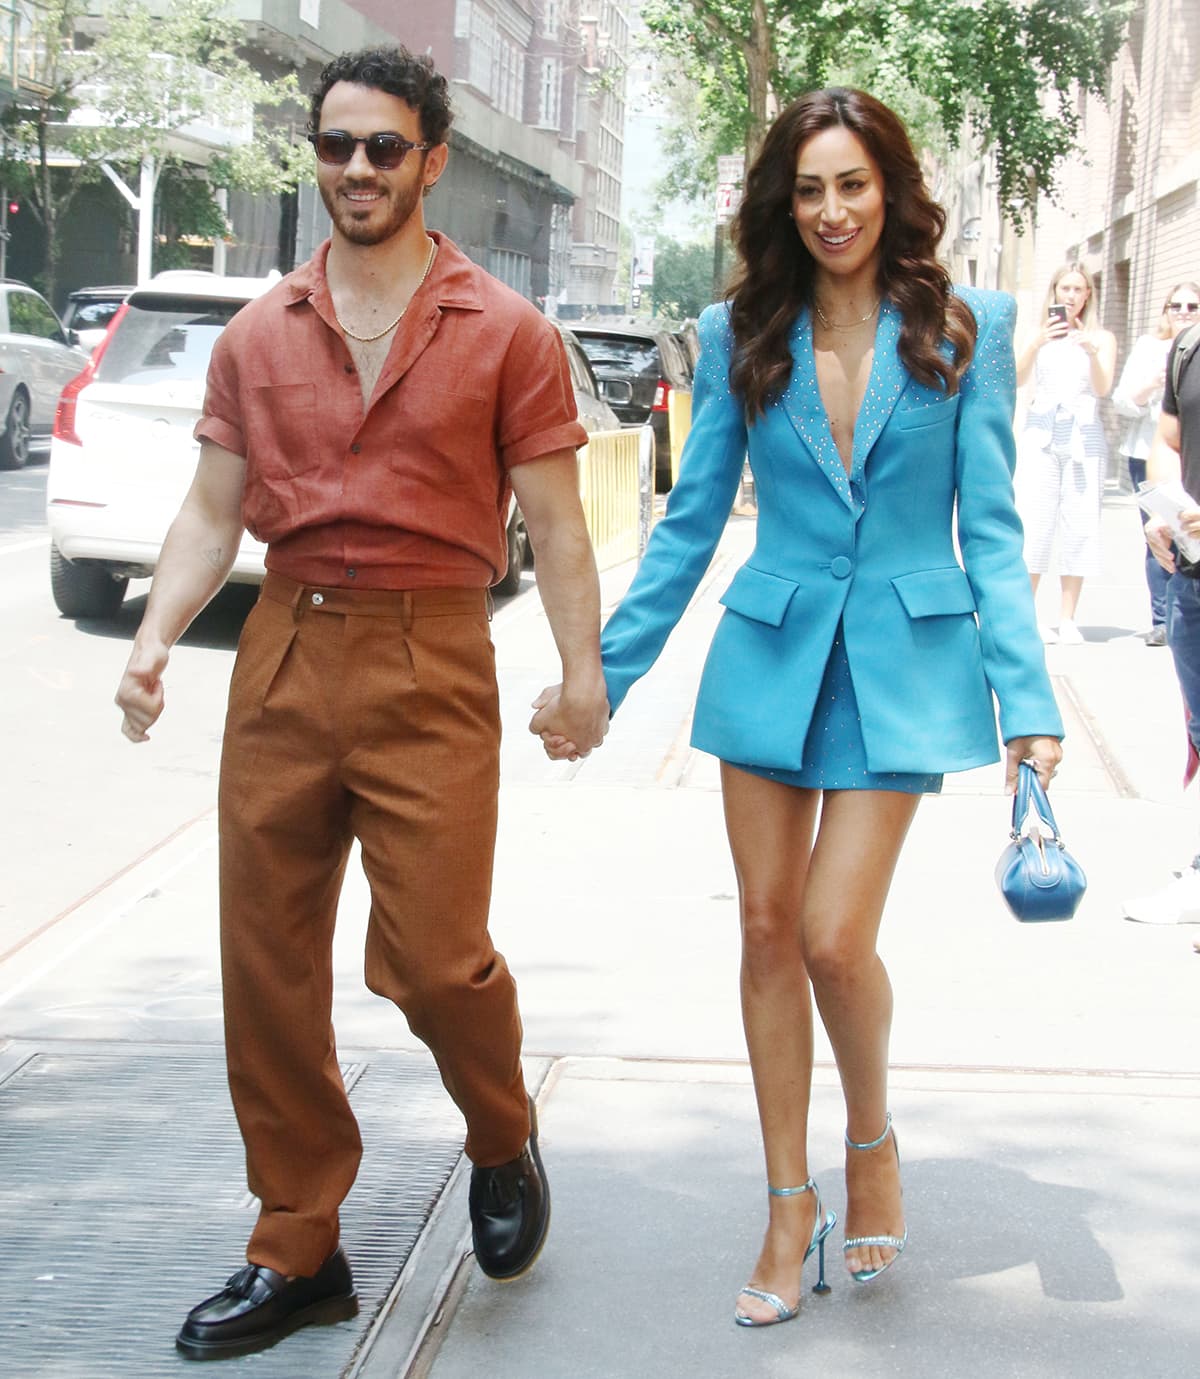 Kevin Jonas wears a terracotta shirt with brown pants, while his wife dons a blue Alex Perry skirt suit with crystal embellishments